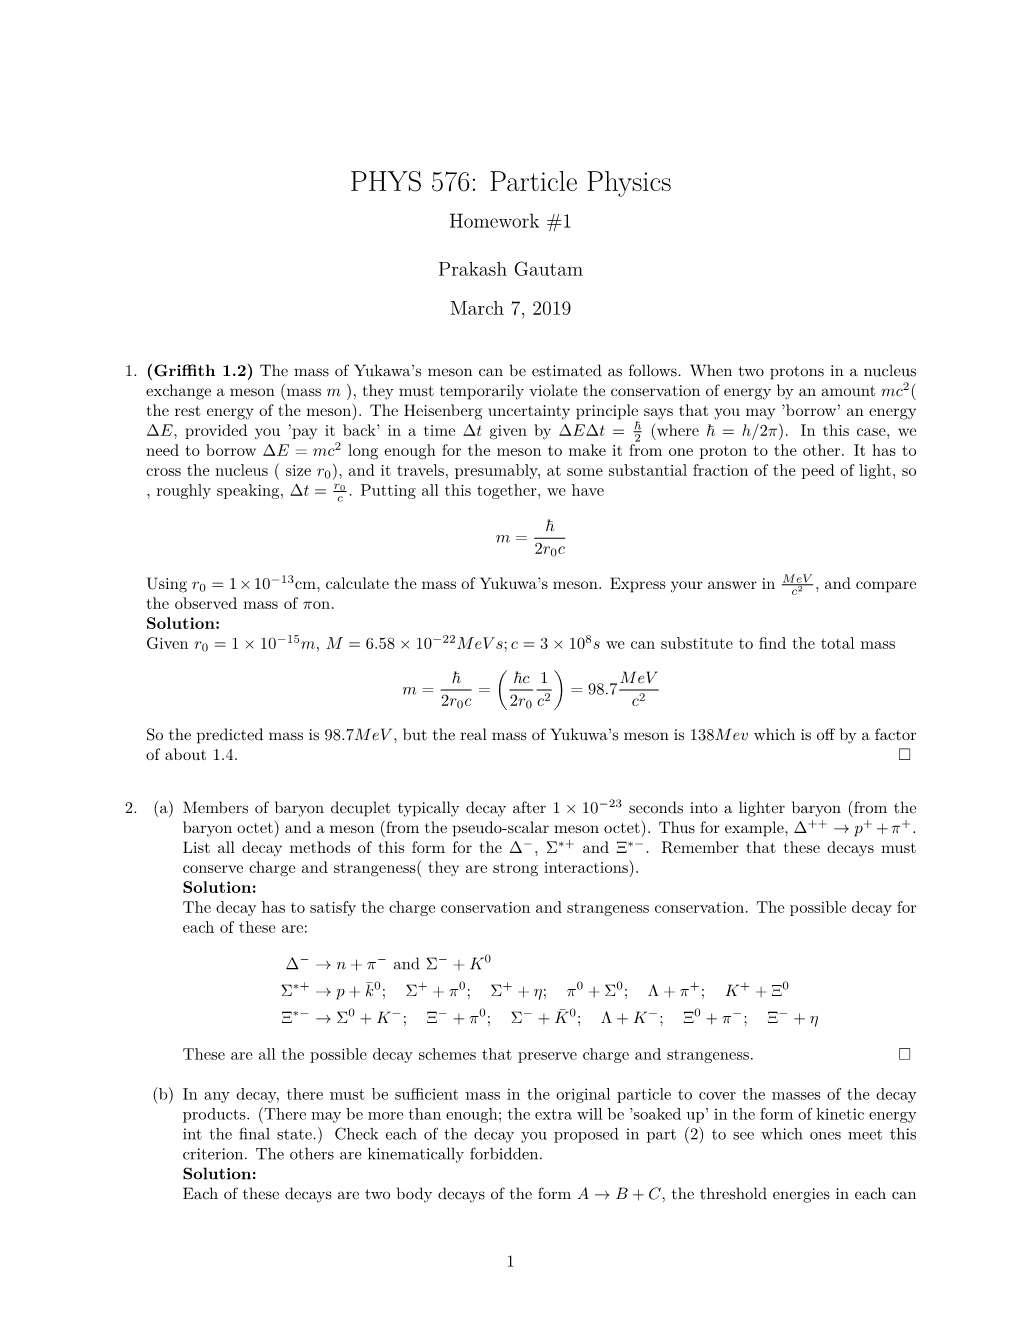 PHYS 576: Particle Physics Homework #1